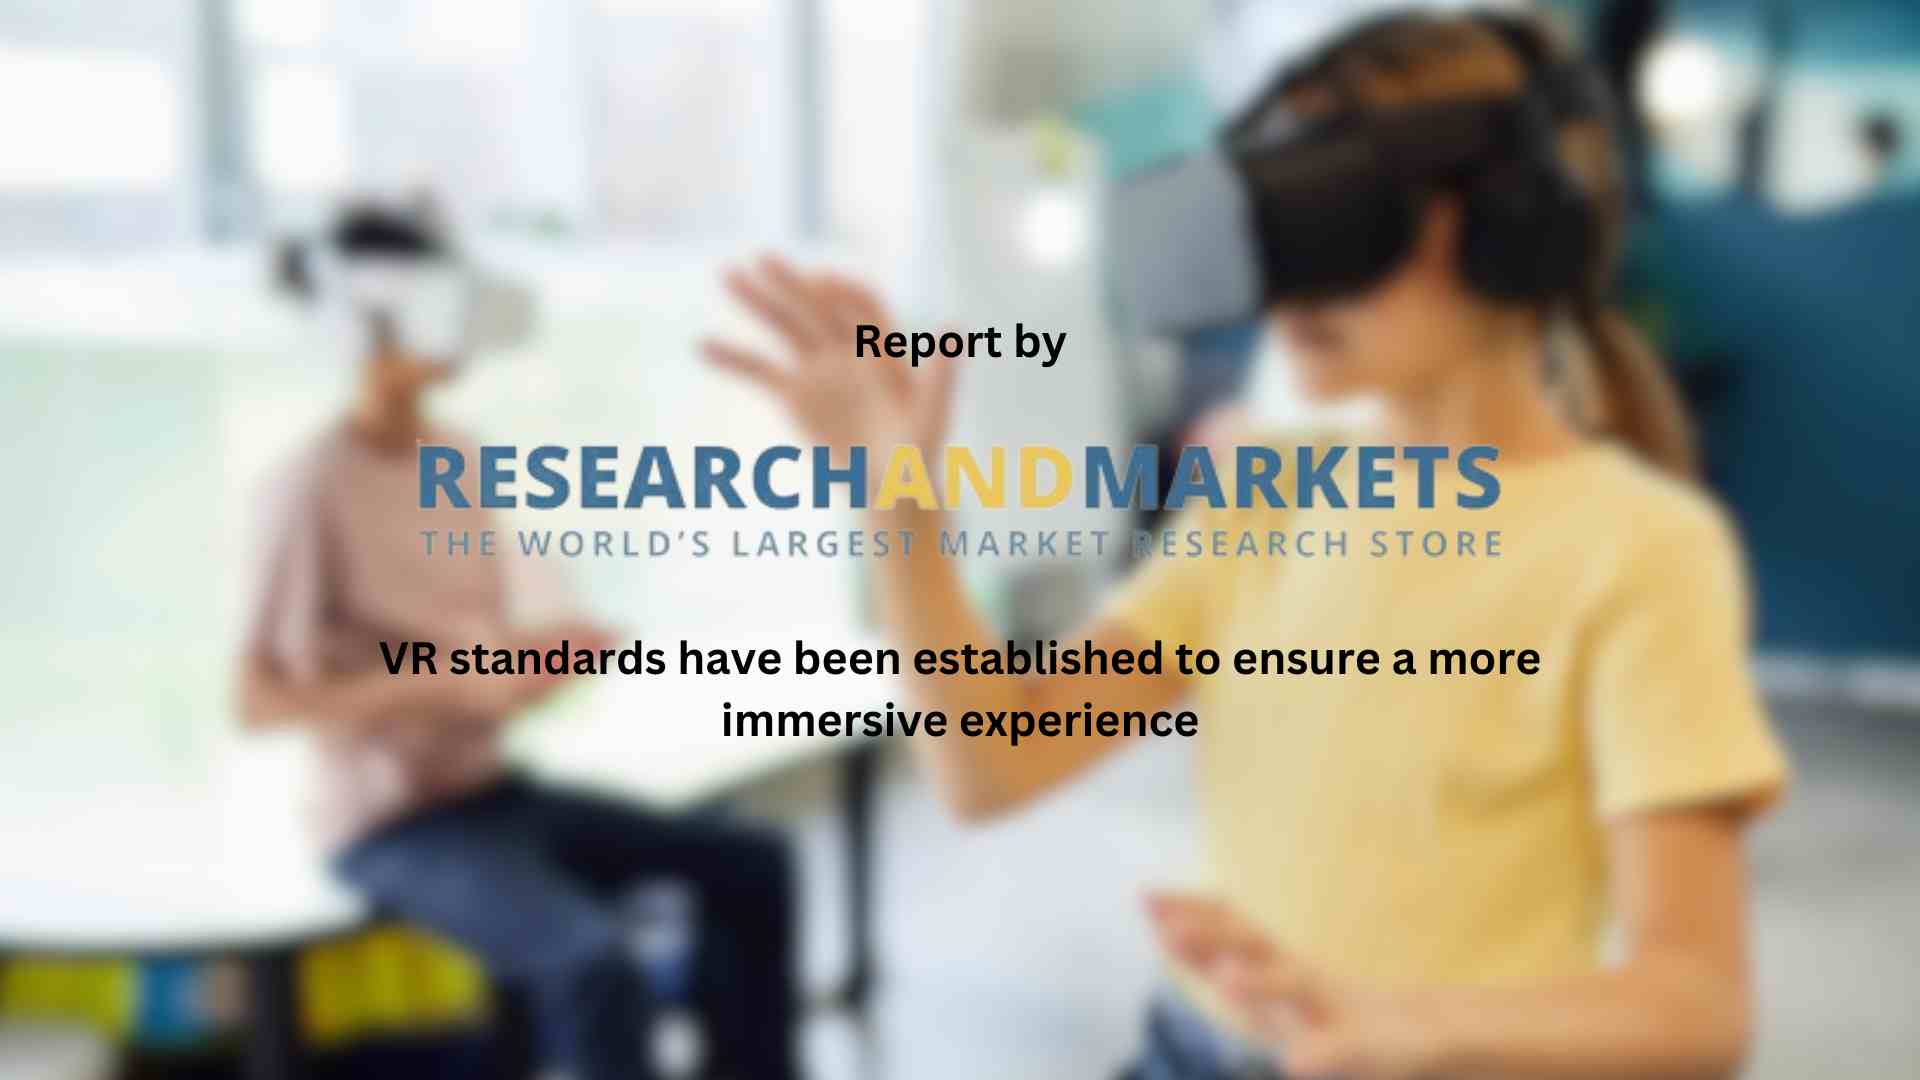 Virtual Reality Technologies Global Market Forecast Report to 2028 - Growing Use of HMDS in Gaming and Entertainment - ResearchAndMarkets.com